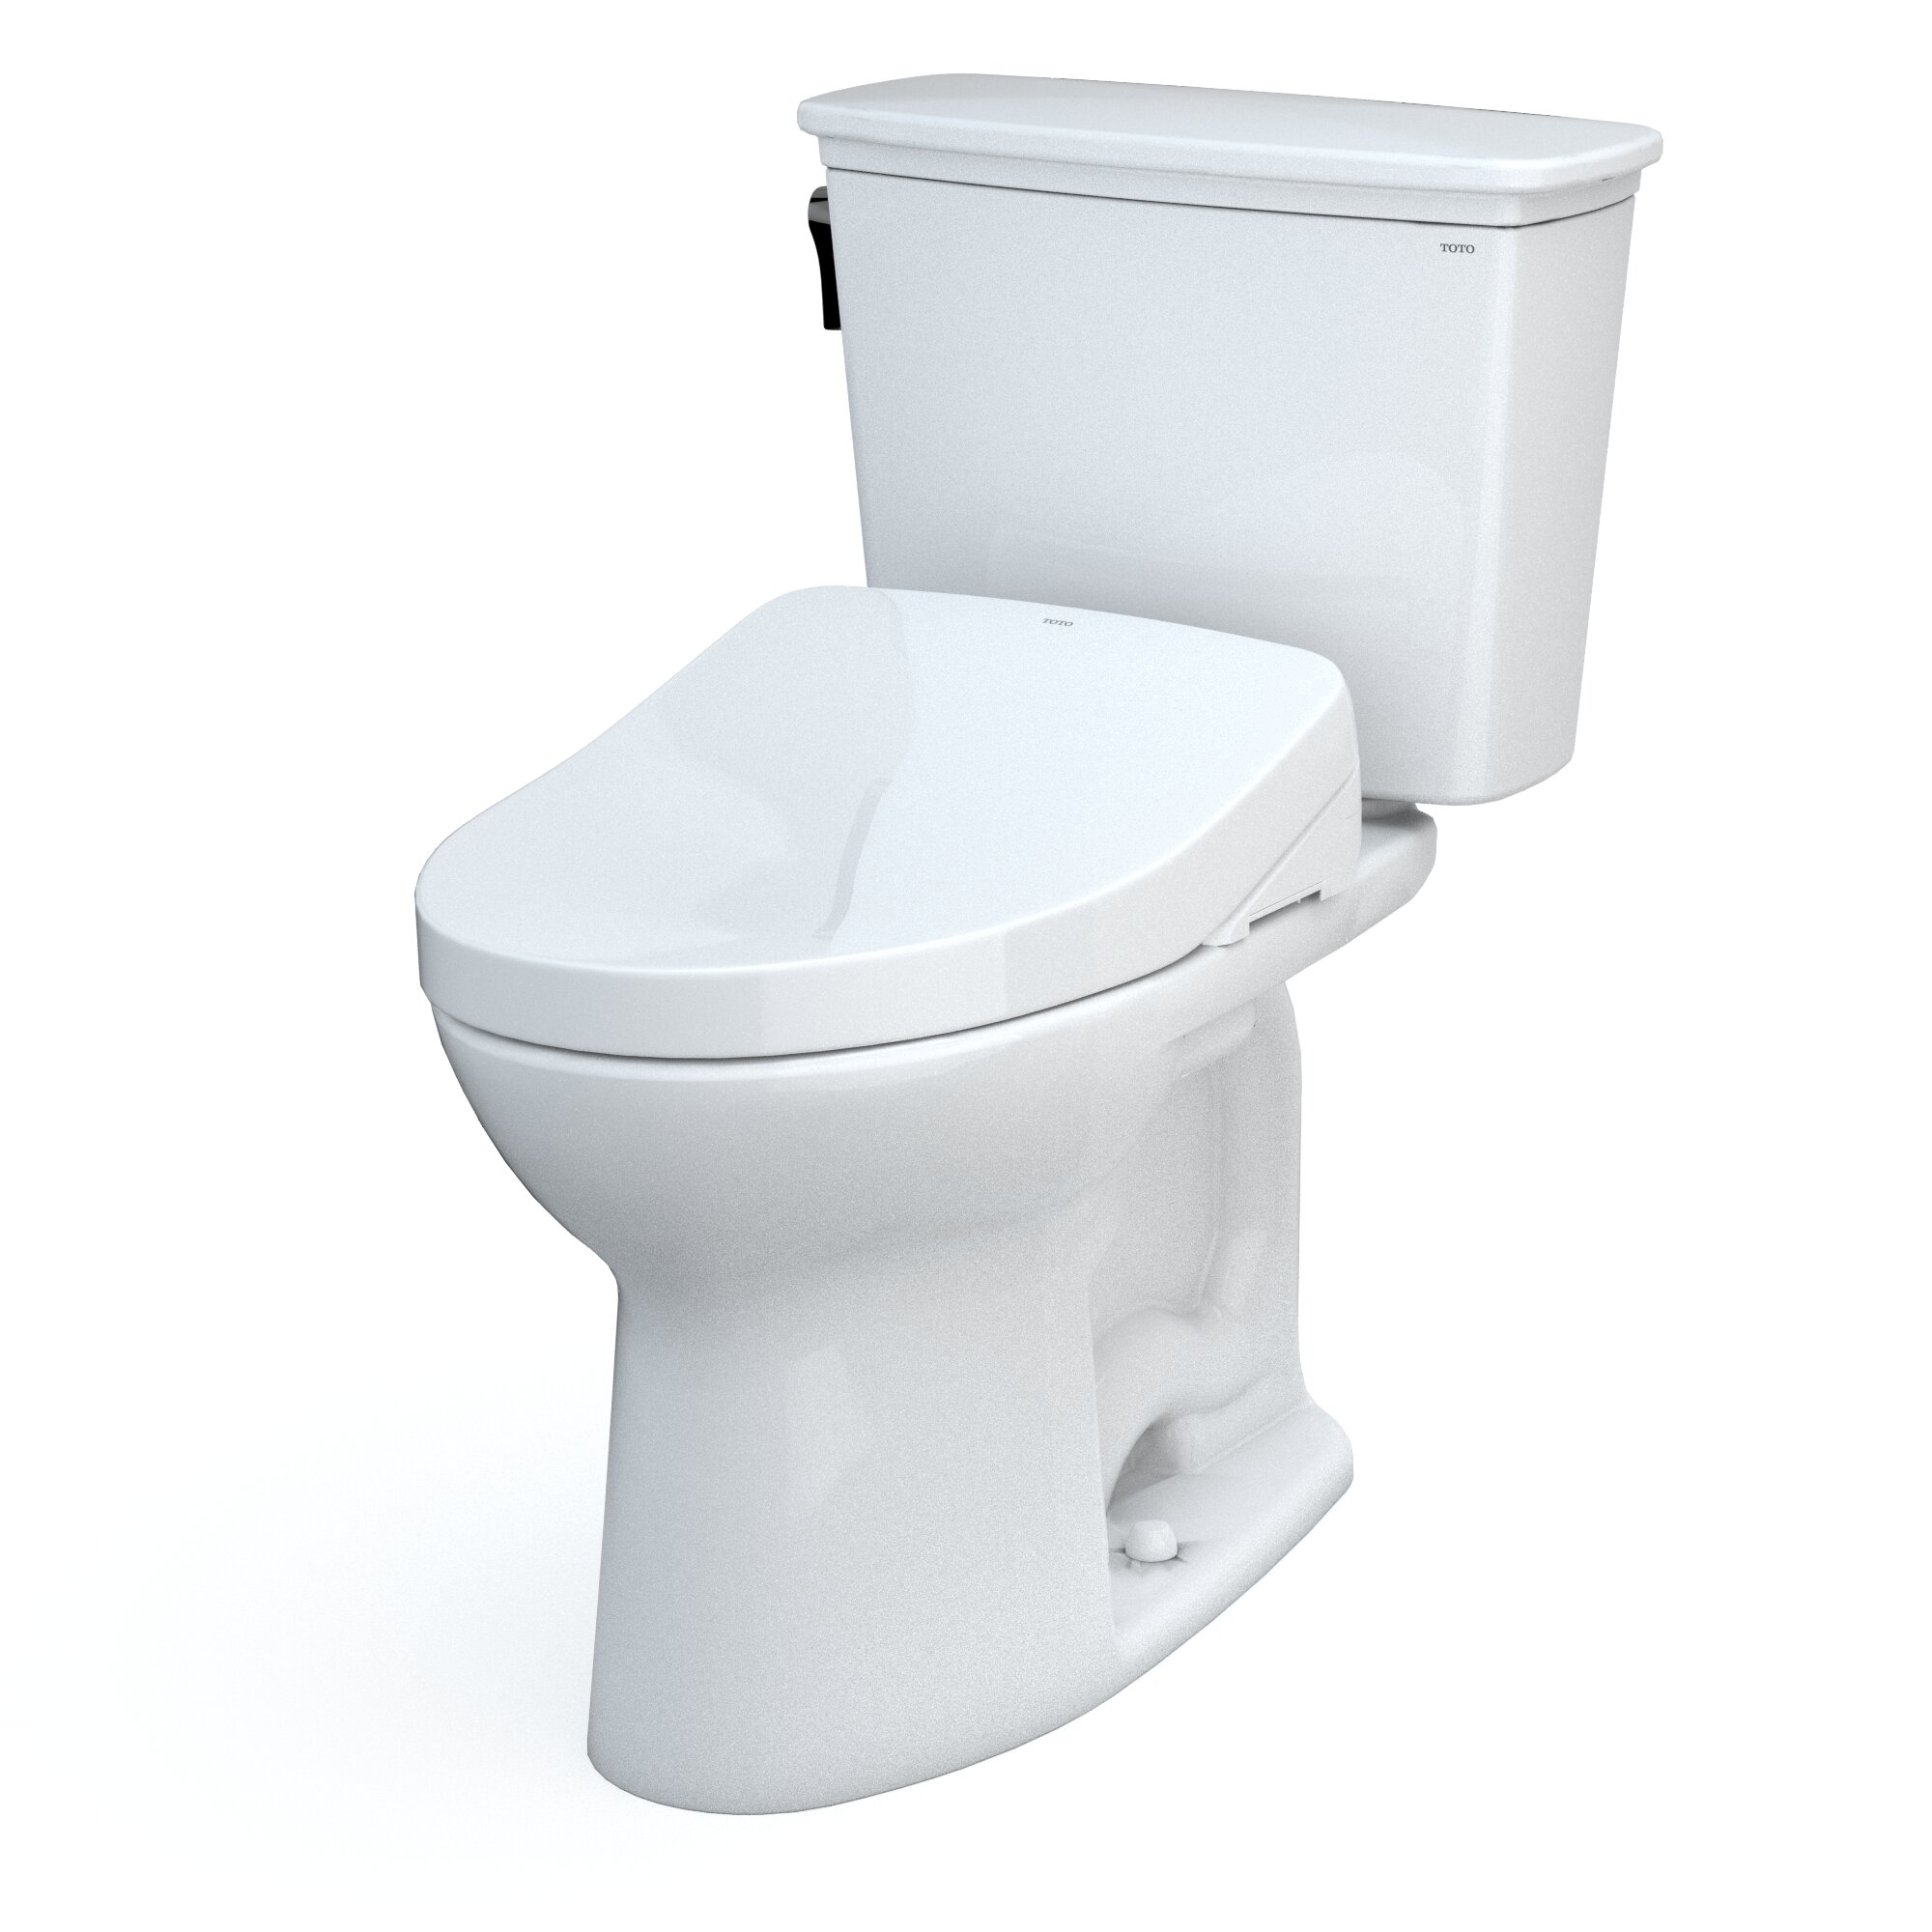 Drake 128 Gpf Water Efficient Elongated Two Piece Toilet With Tornado Flush Seat Included 